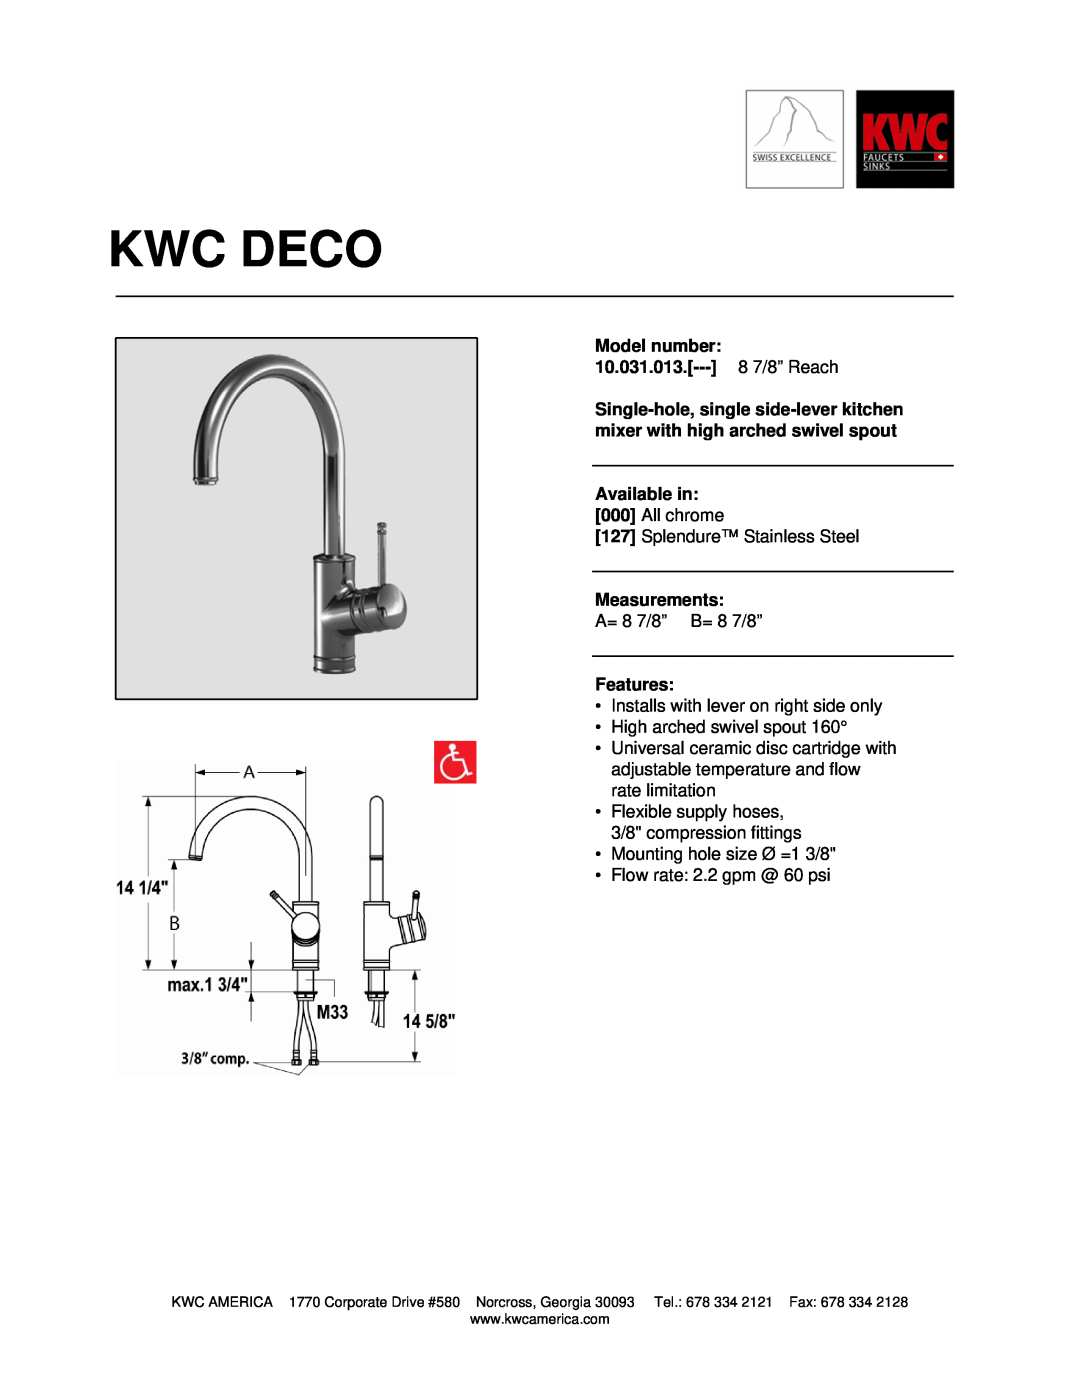 KWC manual Kwc Deco, Model number 10.031.013.--- 8 7/8” Reach, Available in, Measurements, Features 